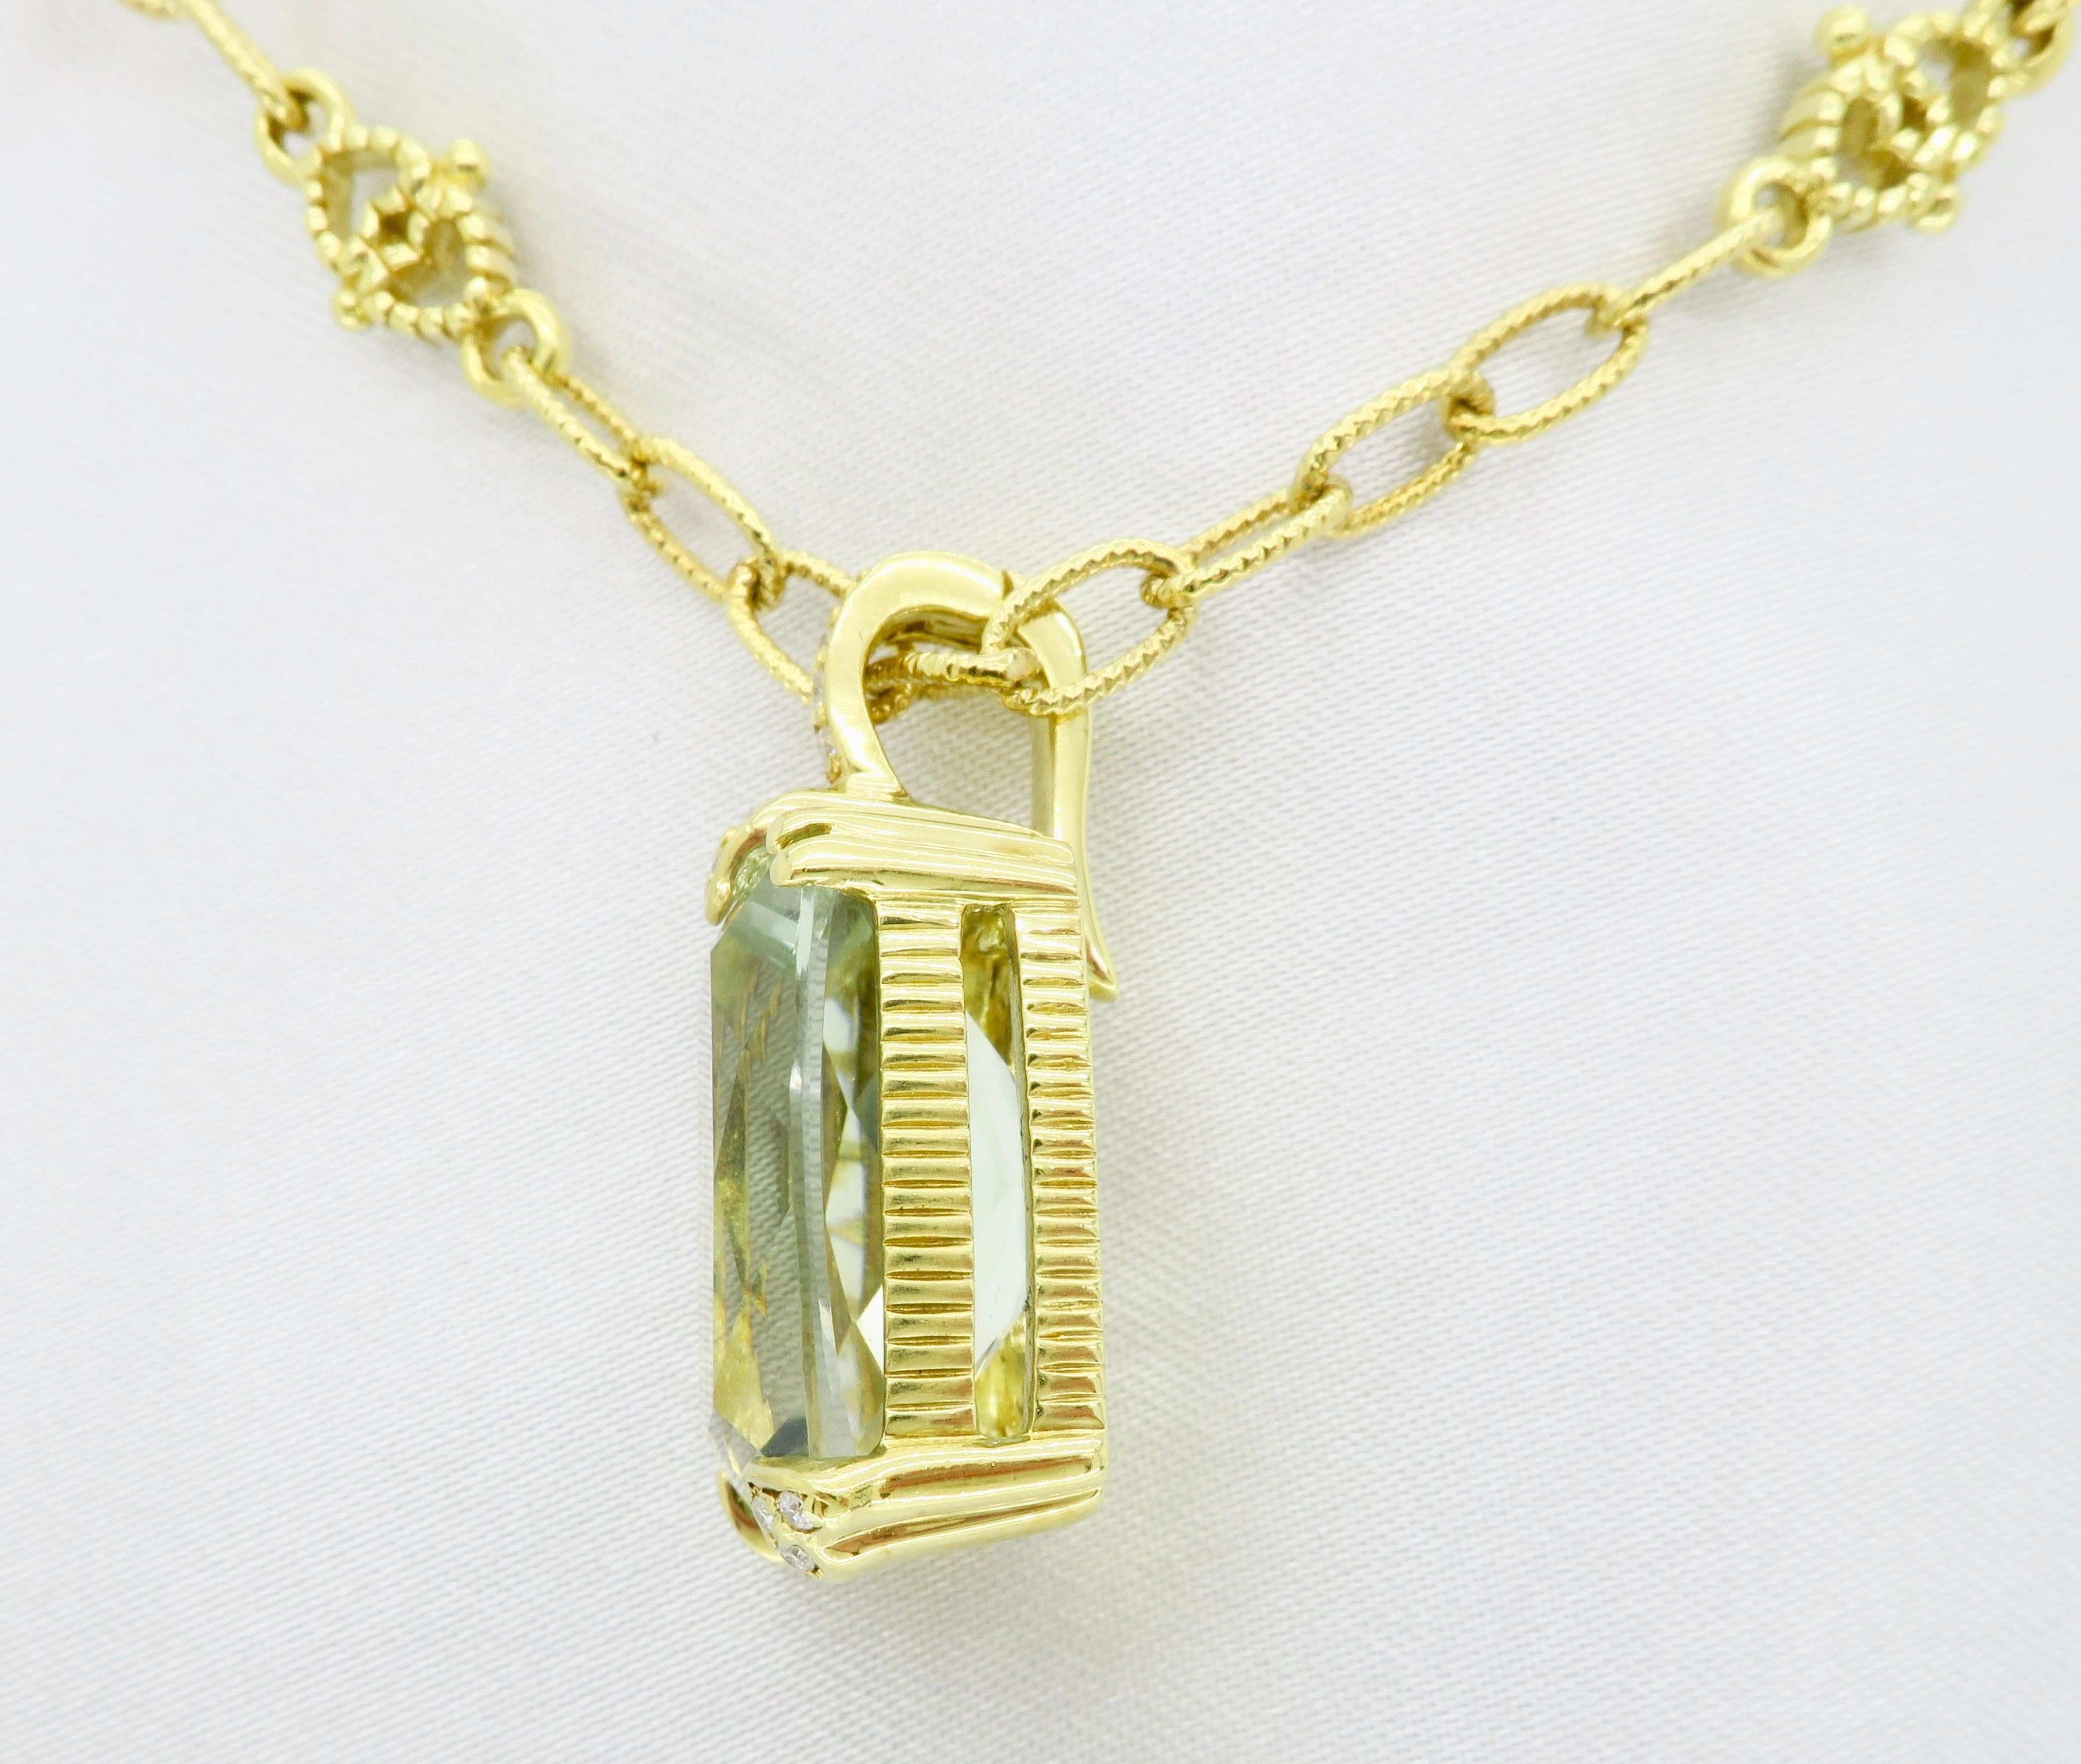 Green Amethyst and Diamond Pendant Necklace in 18 Karat Yellow Gold 4